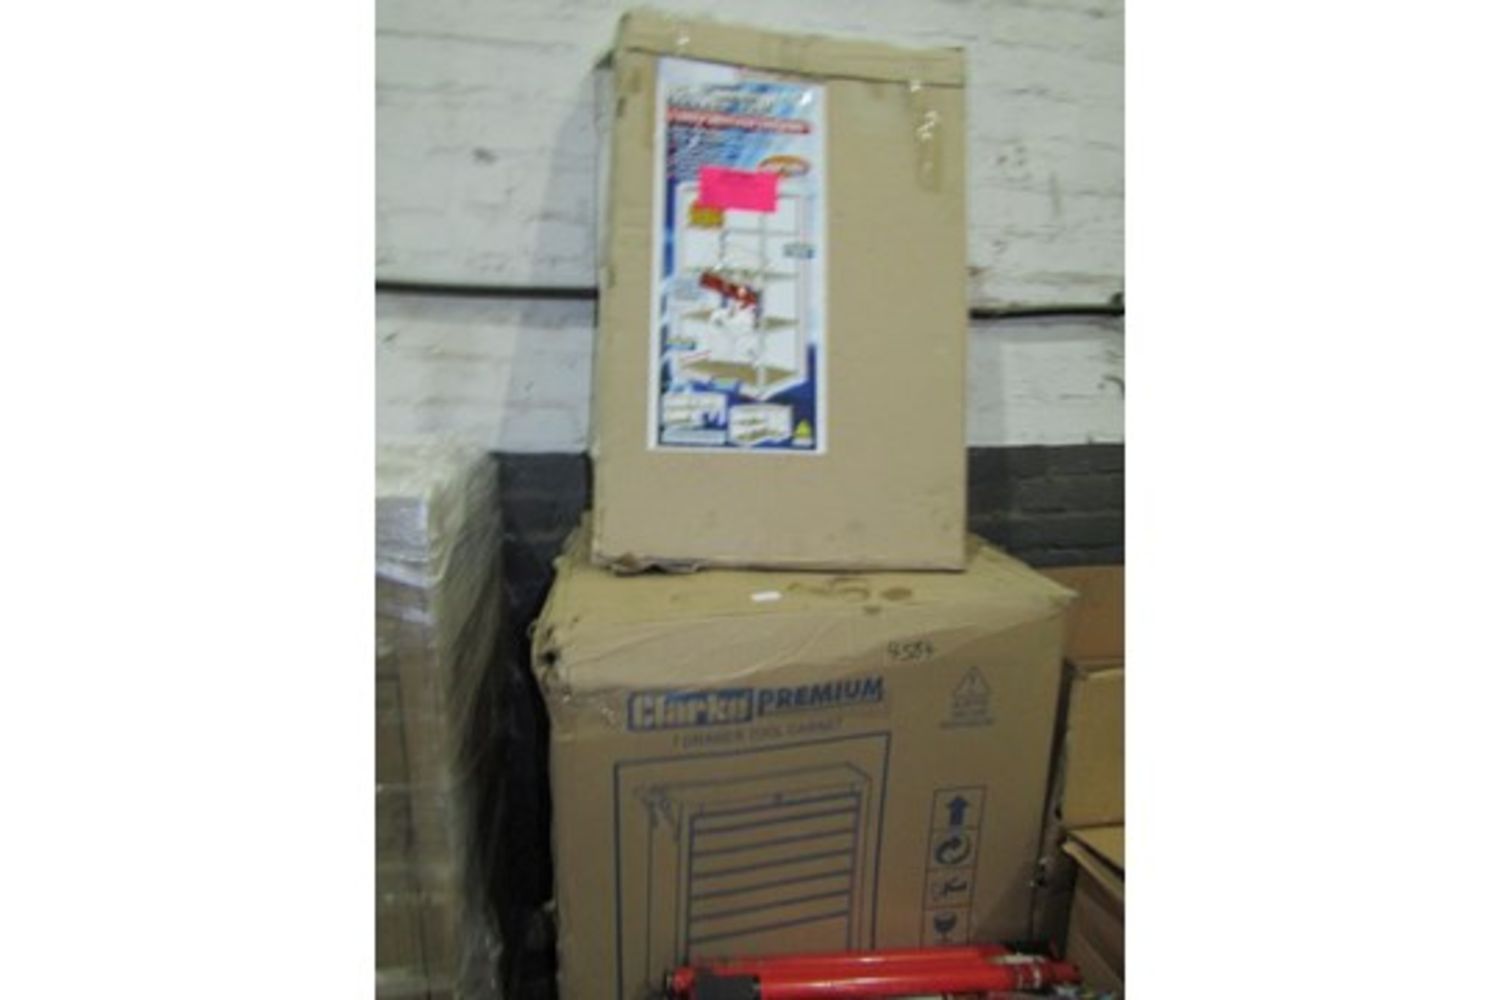 Fresh Stock of Machine Mart Including: bulk box lots of machine mart, boxes of various tools and more!